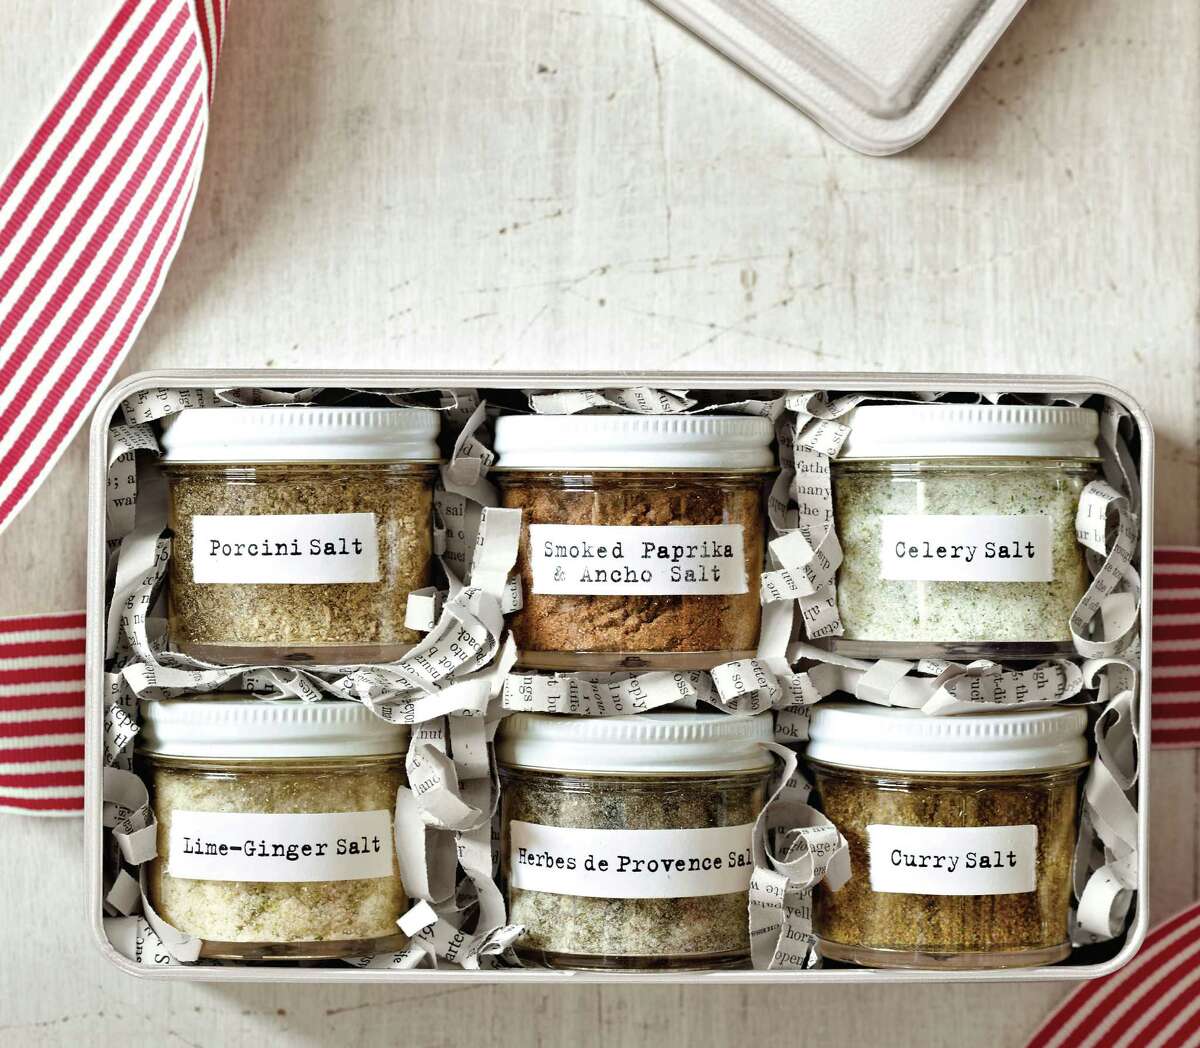 Flavored salts, from the gift-ideas book "Holiday Cheer," give your favorite cooks an array of salty flavors.